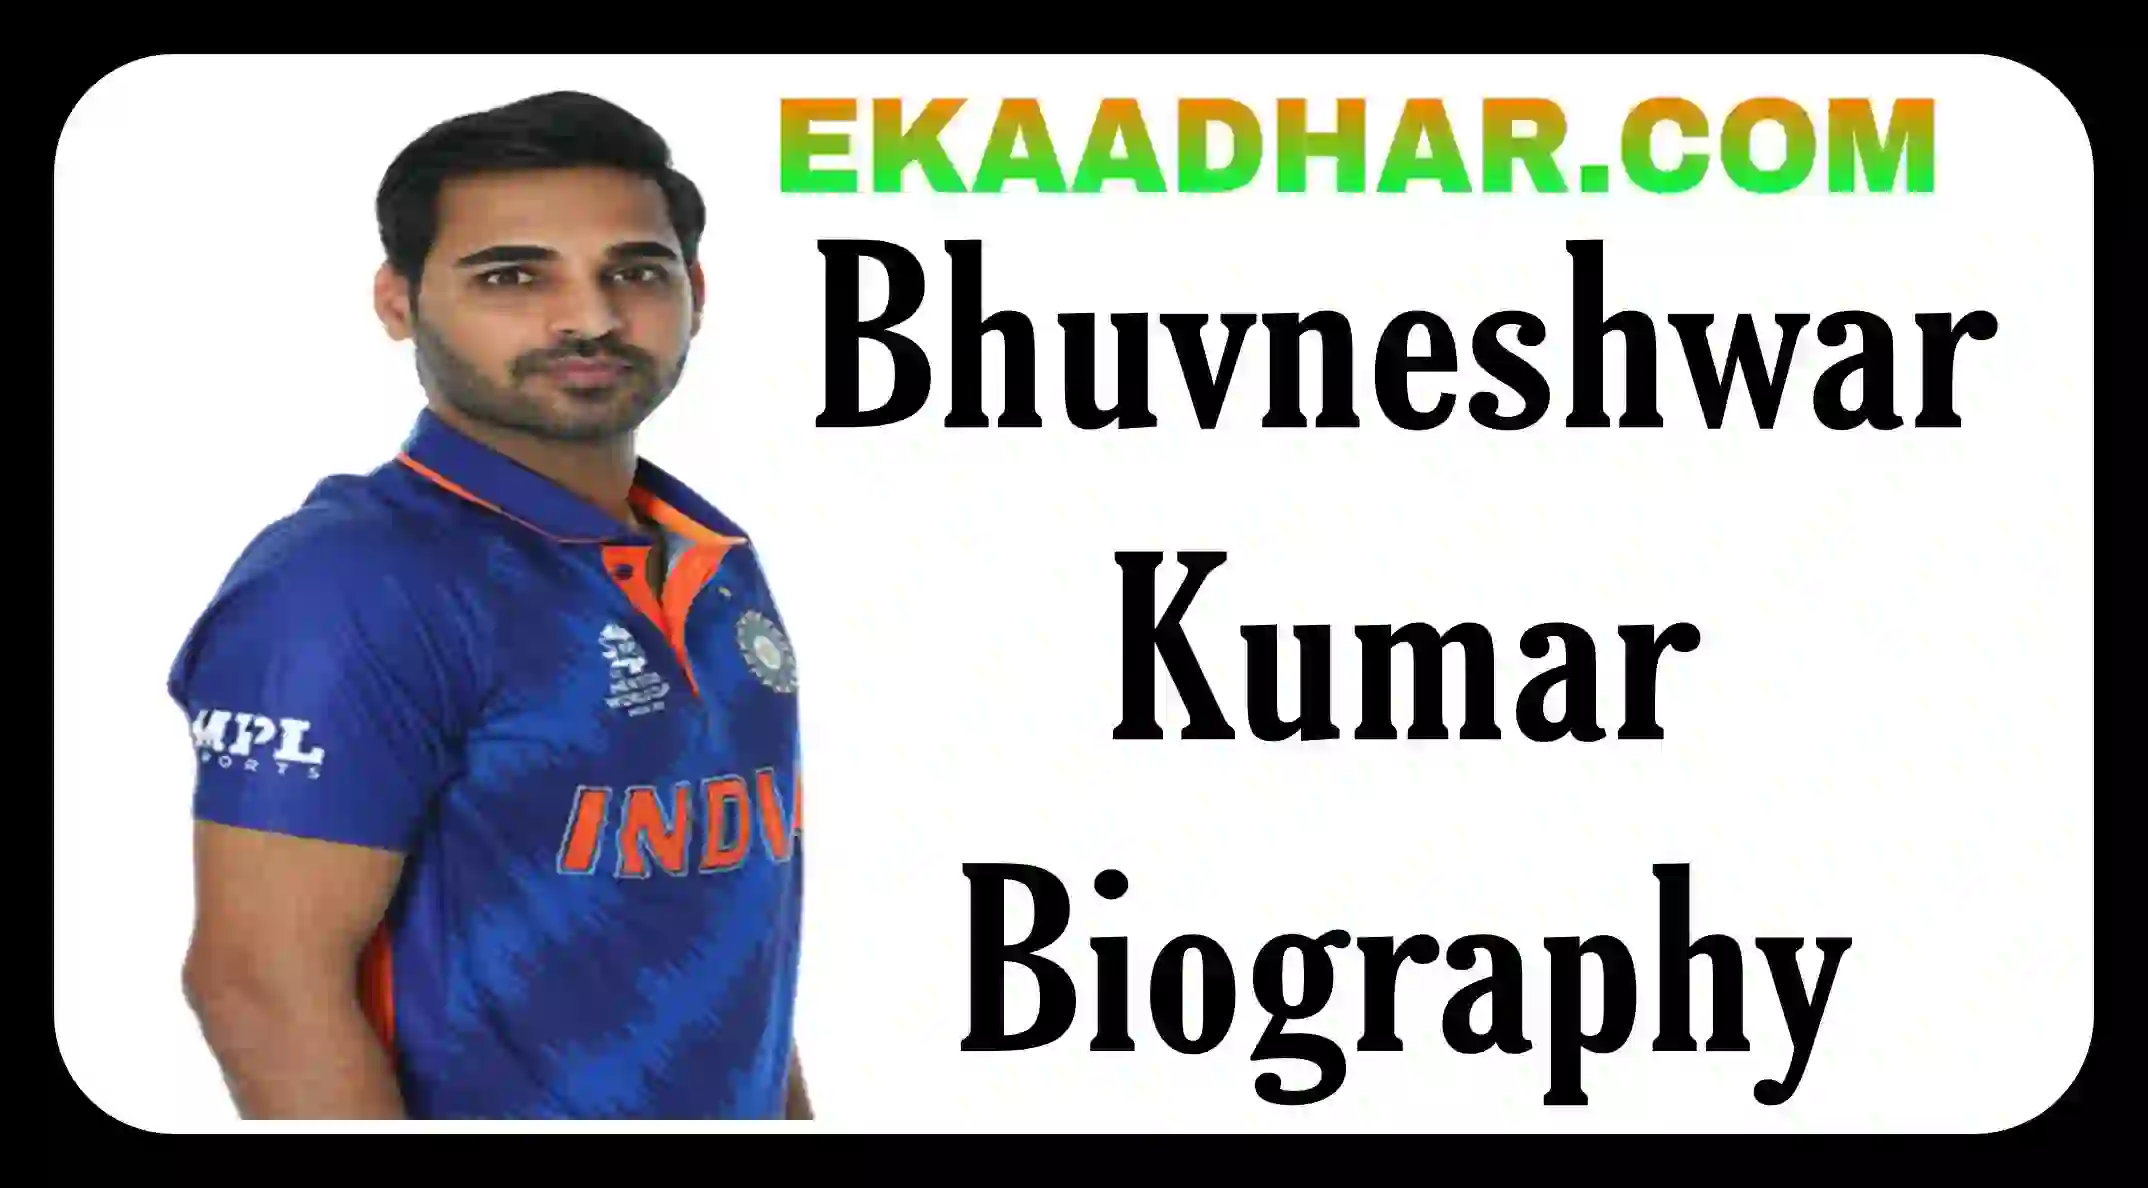 Bhuvneshwar Kumar Biography in hindi ] (Indian Cricketer, Age, Wife, Girlfriend, Family, Net Worth, IPL Prize, Father, Sister, Cast, Village, State, Instagram, Height, Bowling, Current ipl Team